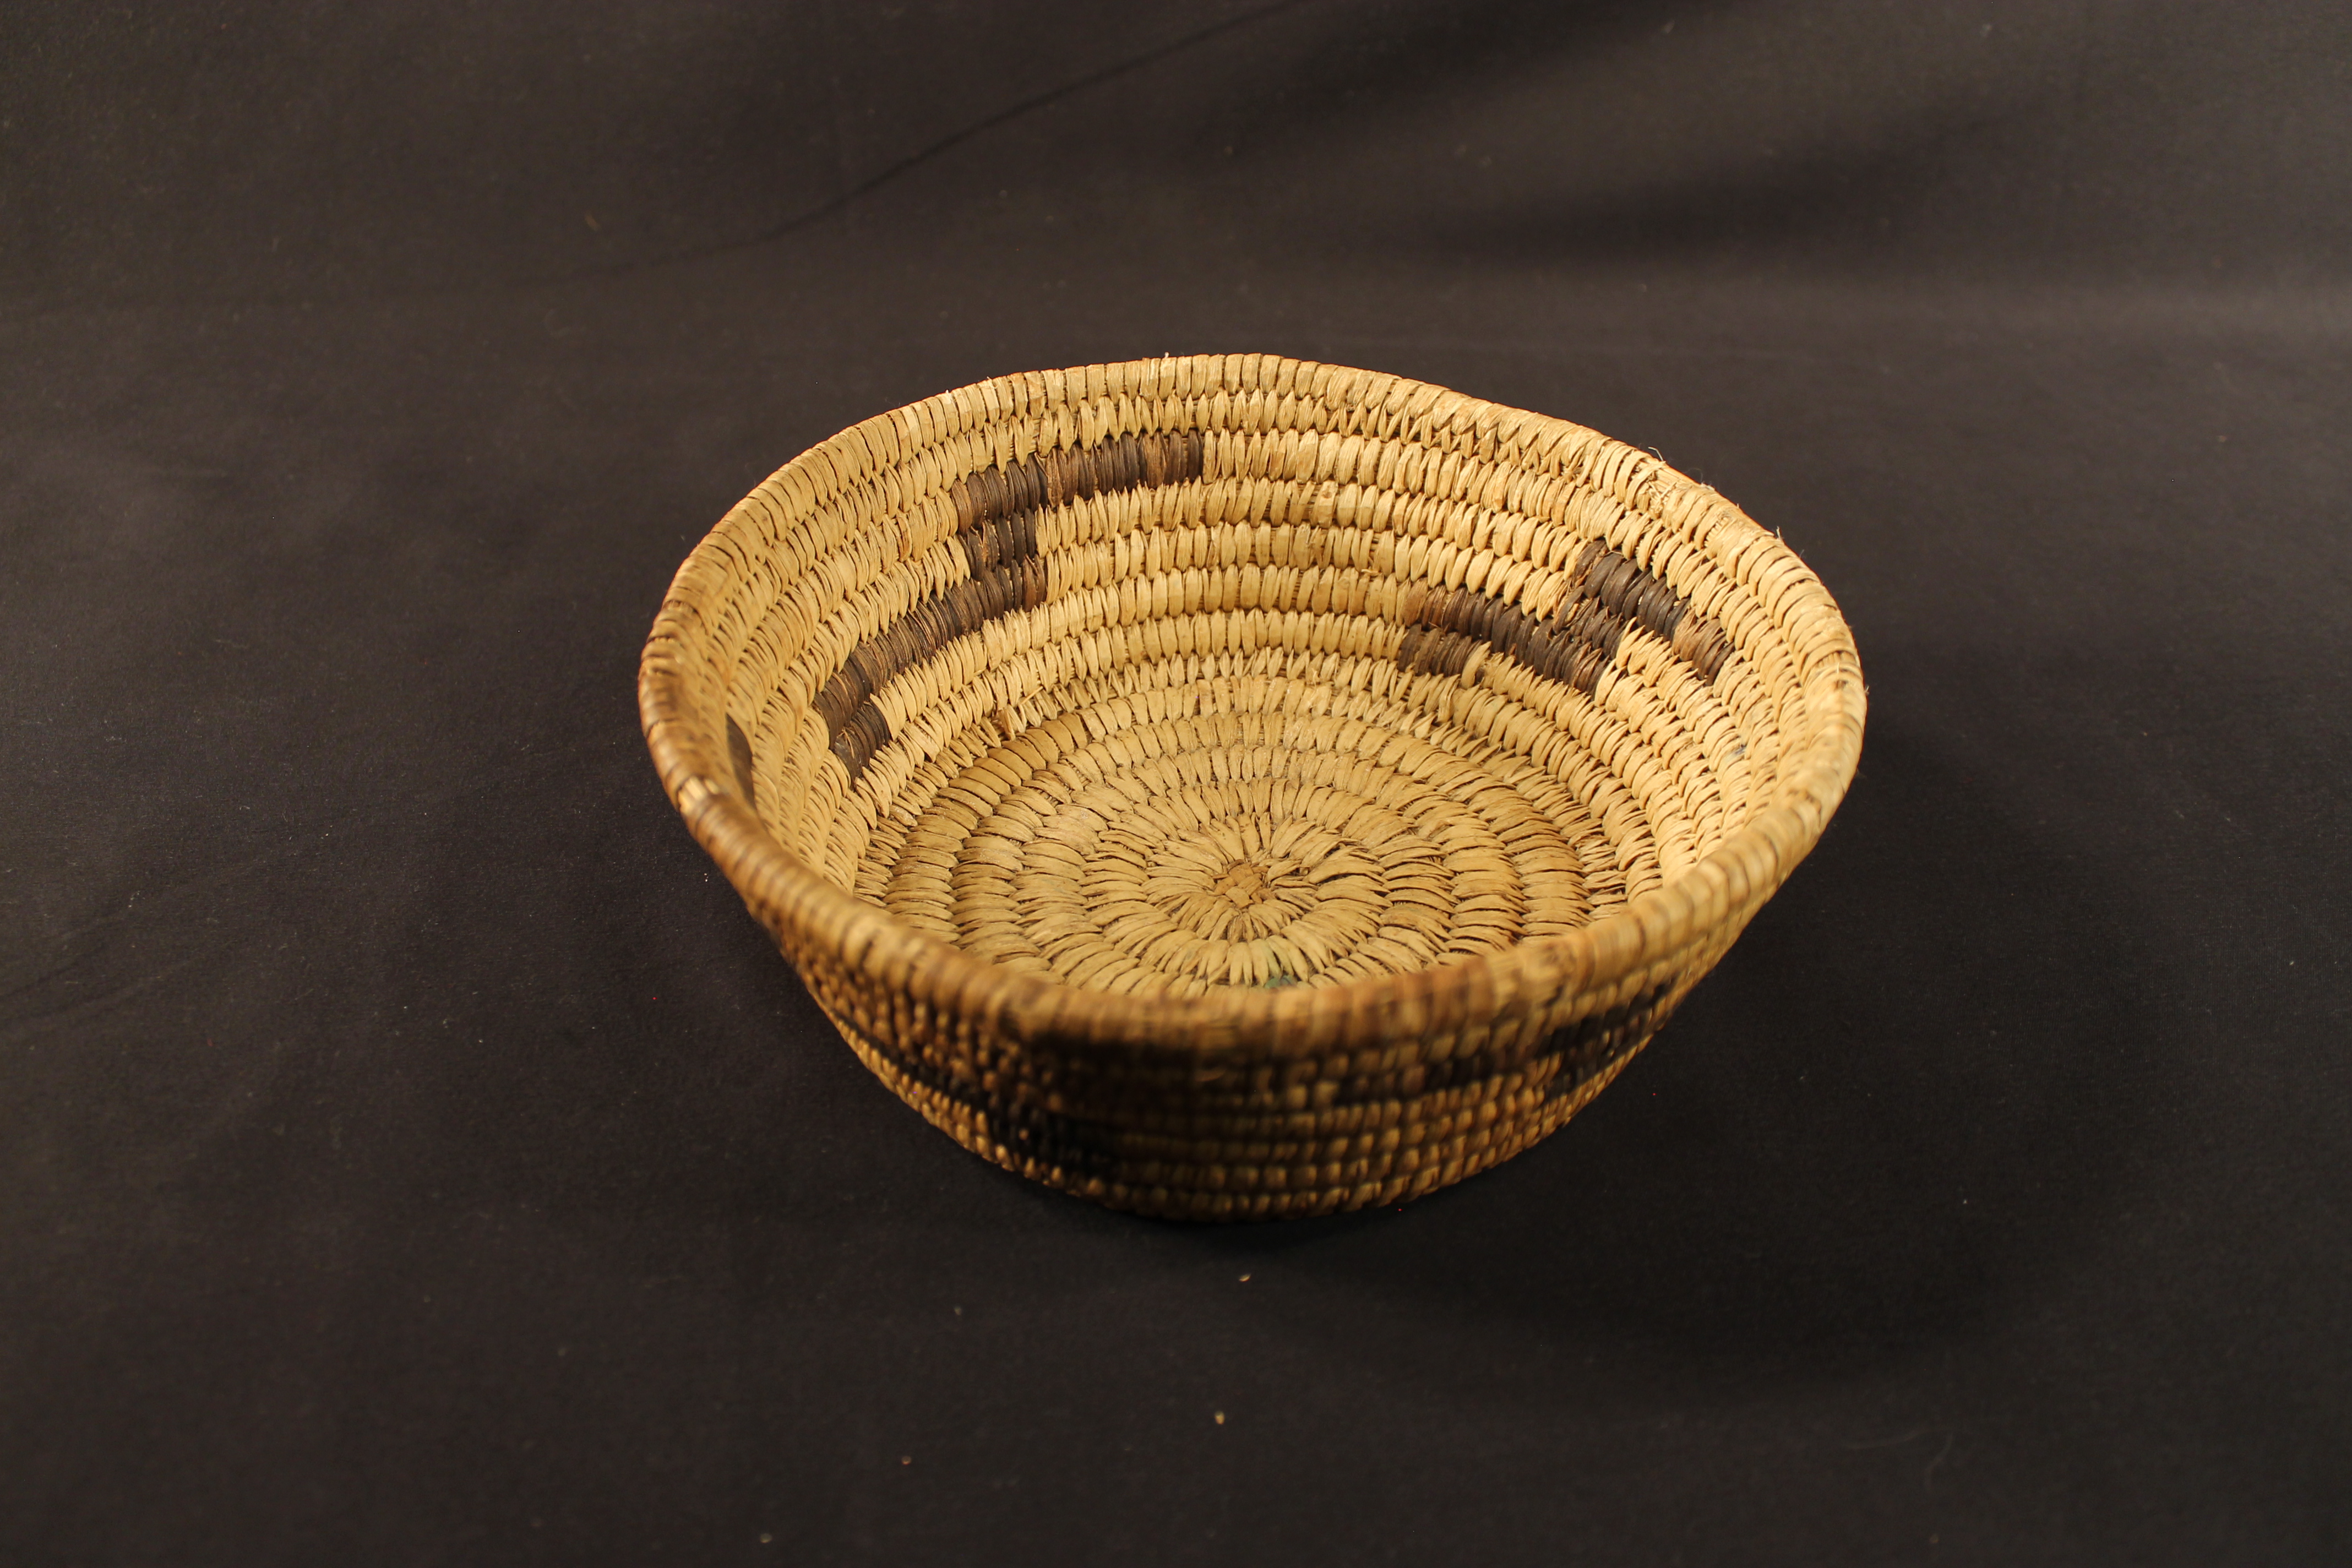 Brown woven coiled basket made up of several rows, and depicts an “s” like pattern made of black woven reed. 